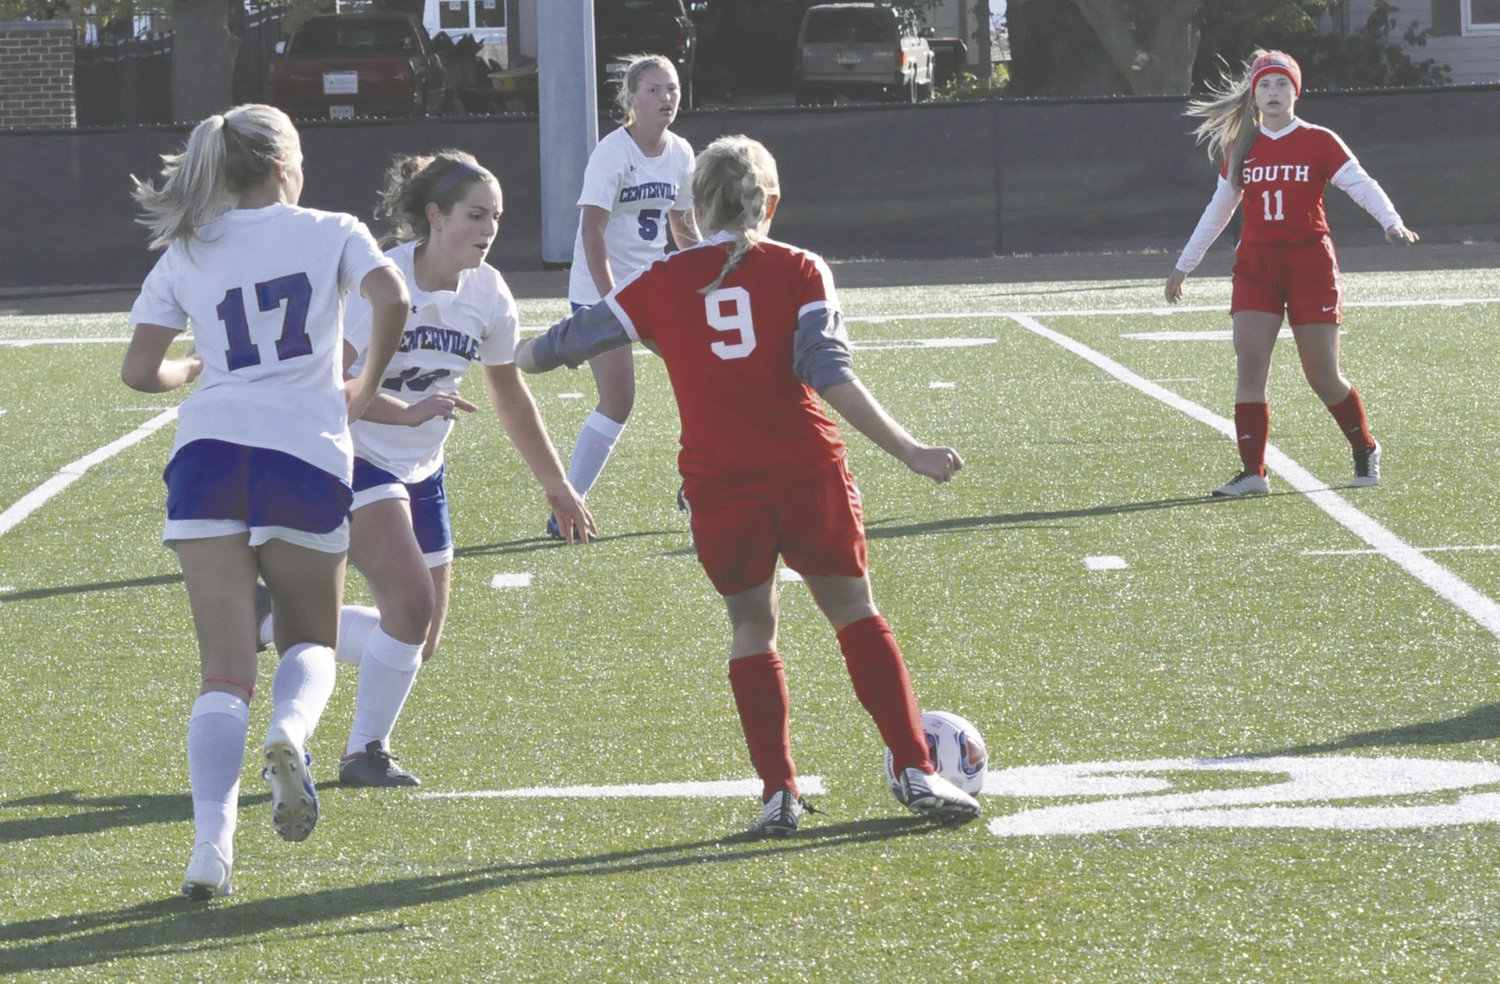 Southmont's Lexie Odum scored the lone Mounties' goal in the 1-0 win over Centerville in the regional semifinal on Saturday.